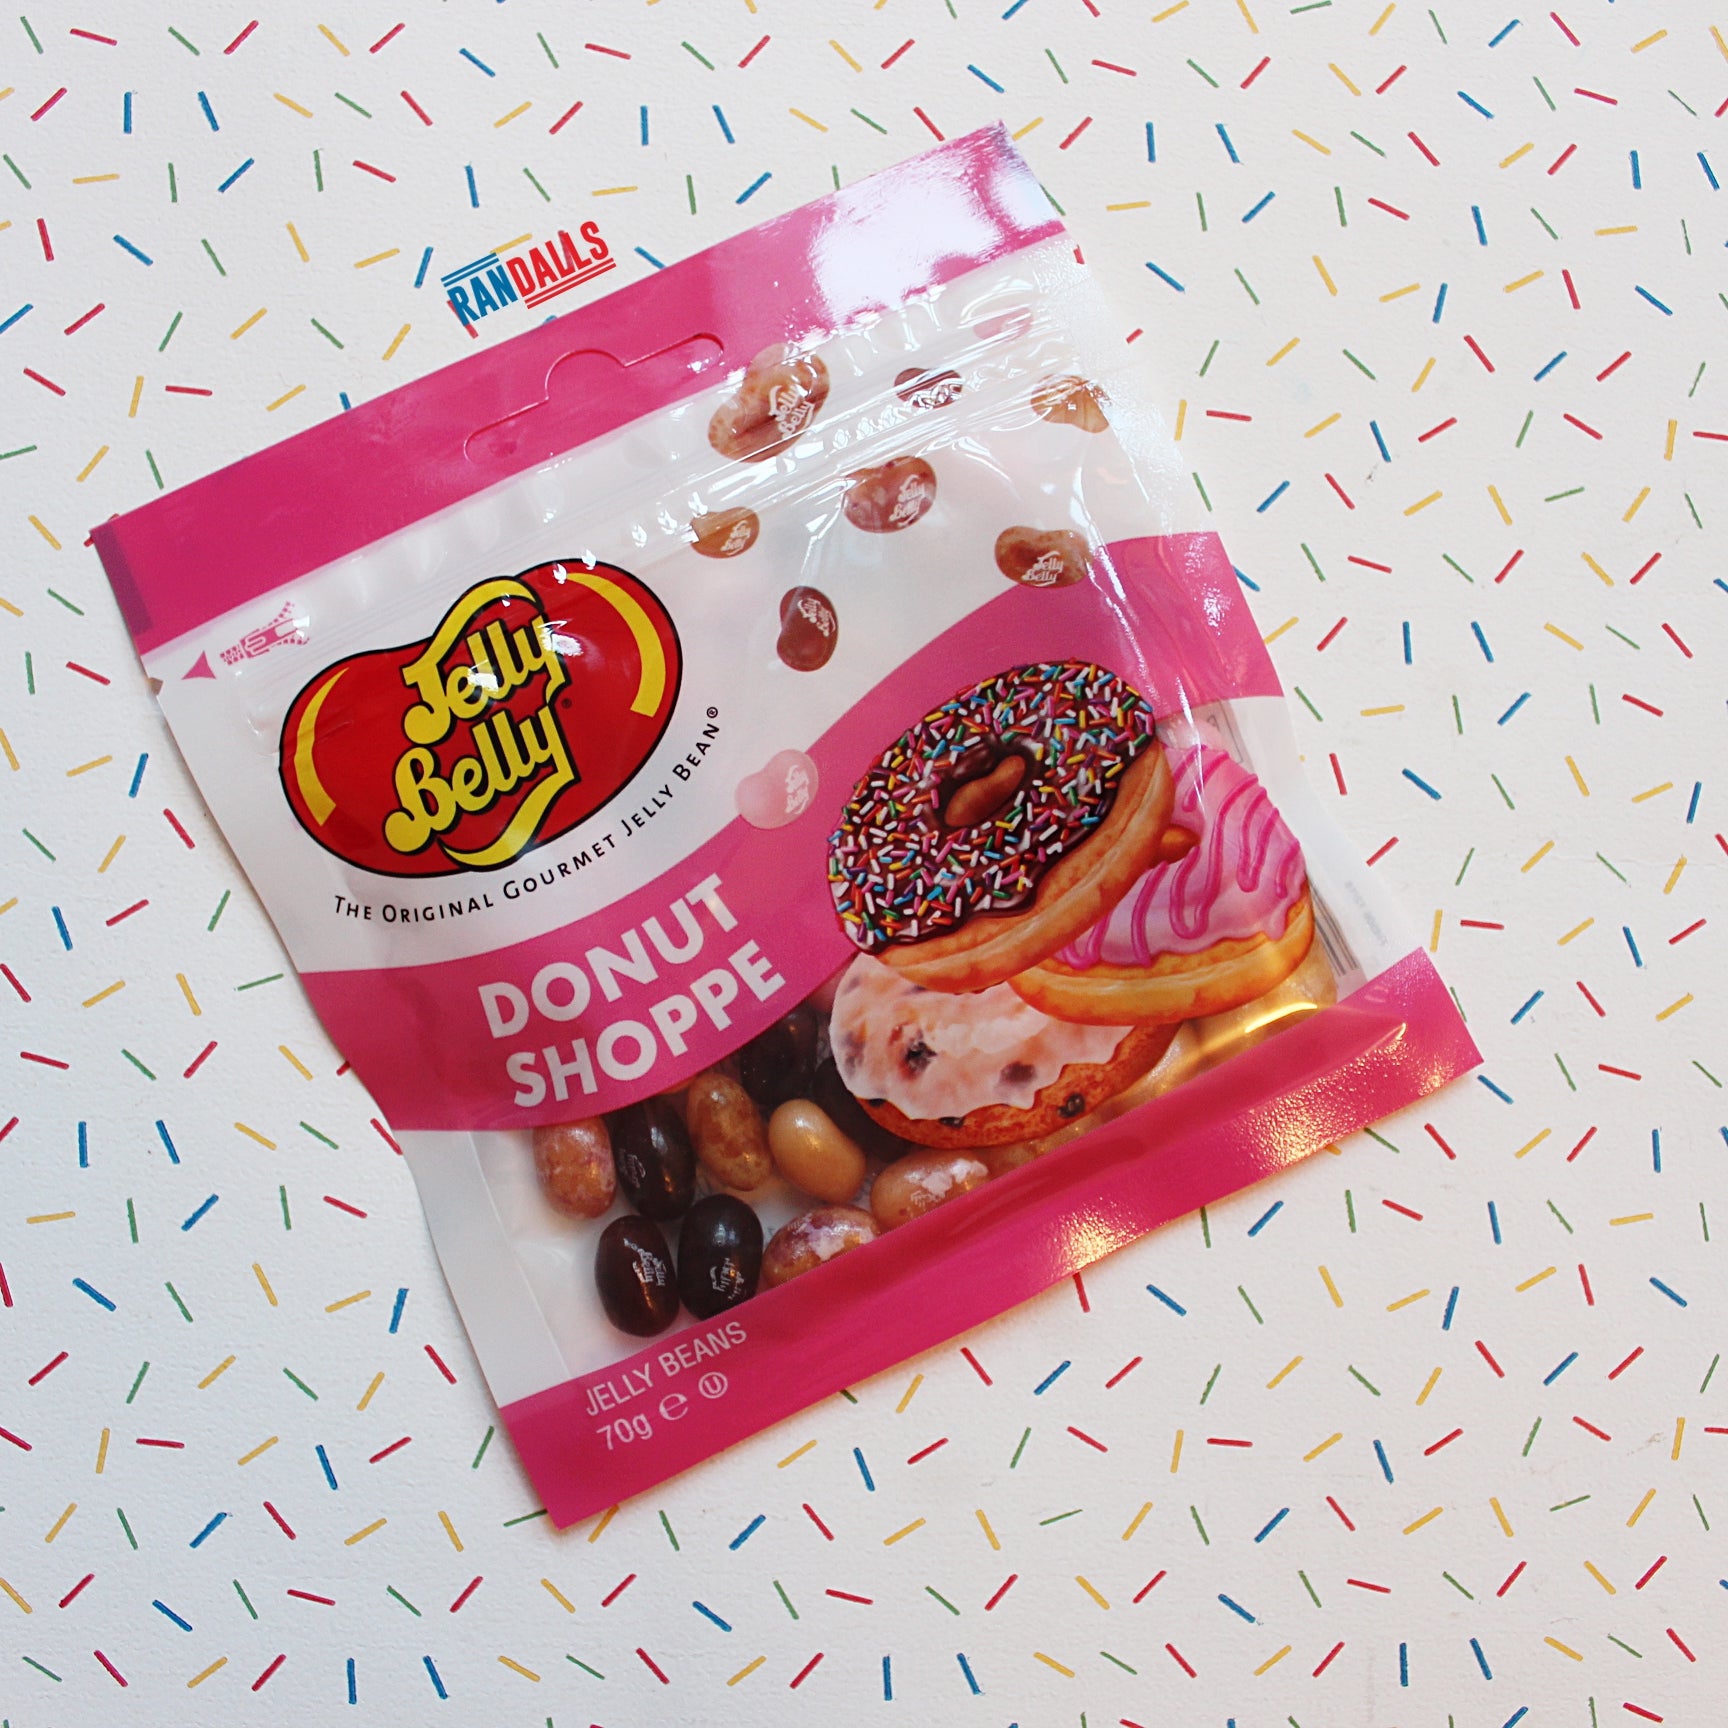 jelly belly donut shoppe jelly beans sweets, candy, chewy, usa, randalls